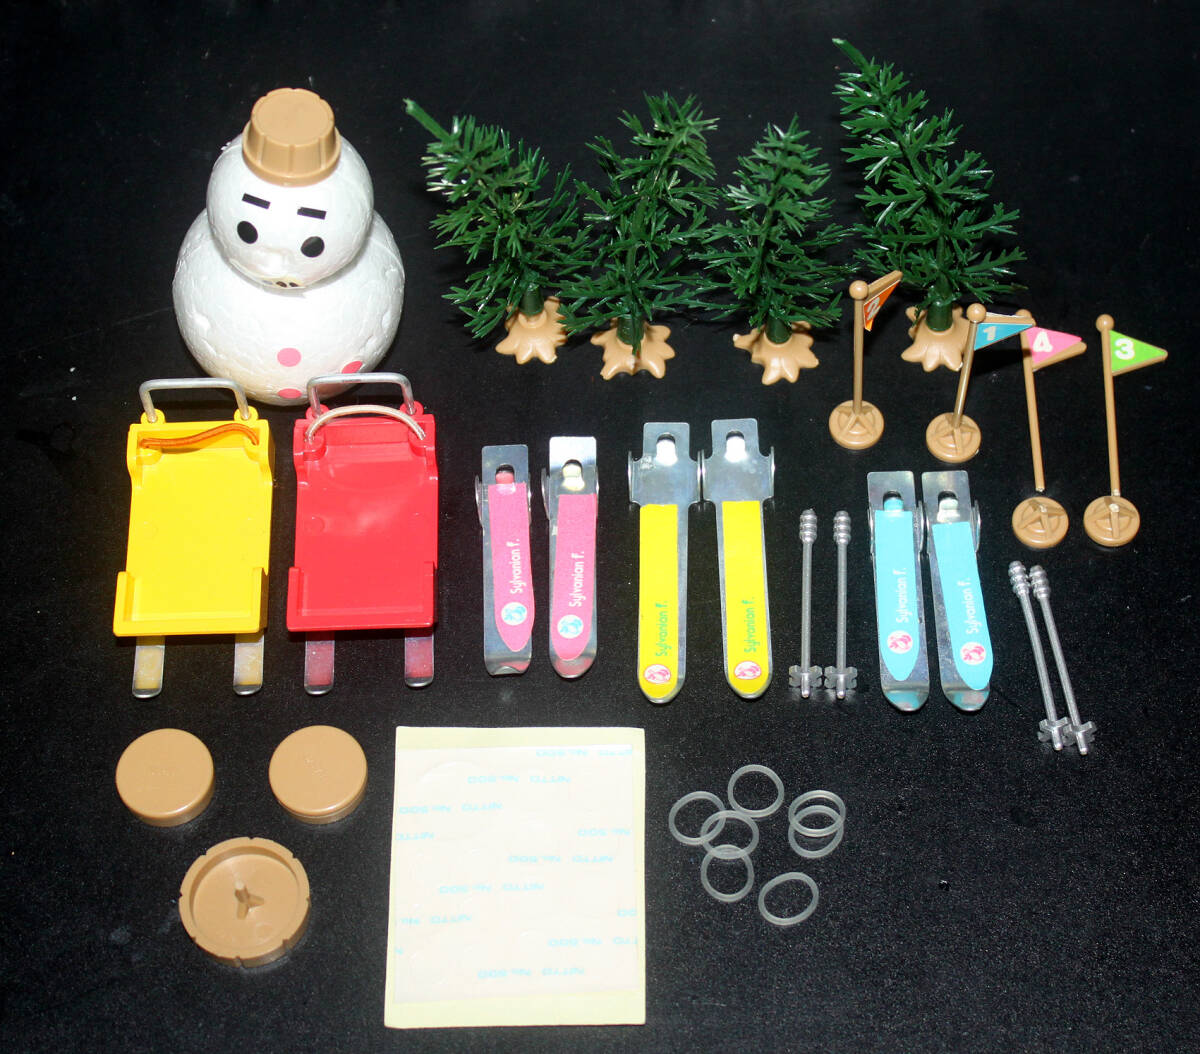  that time thing! Sylvanian Families [ forest. winter set ] Epo k company junk | Vintage, Showa Retro 